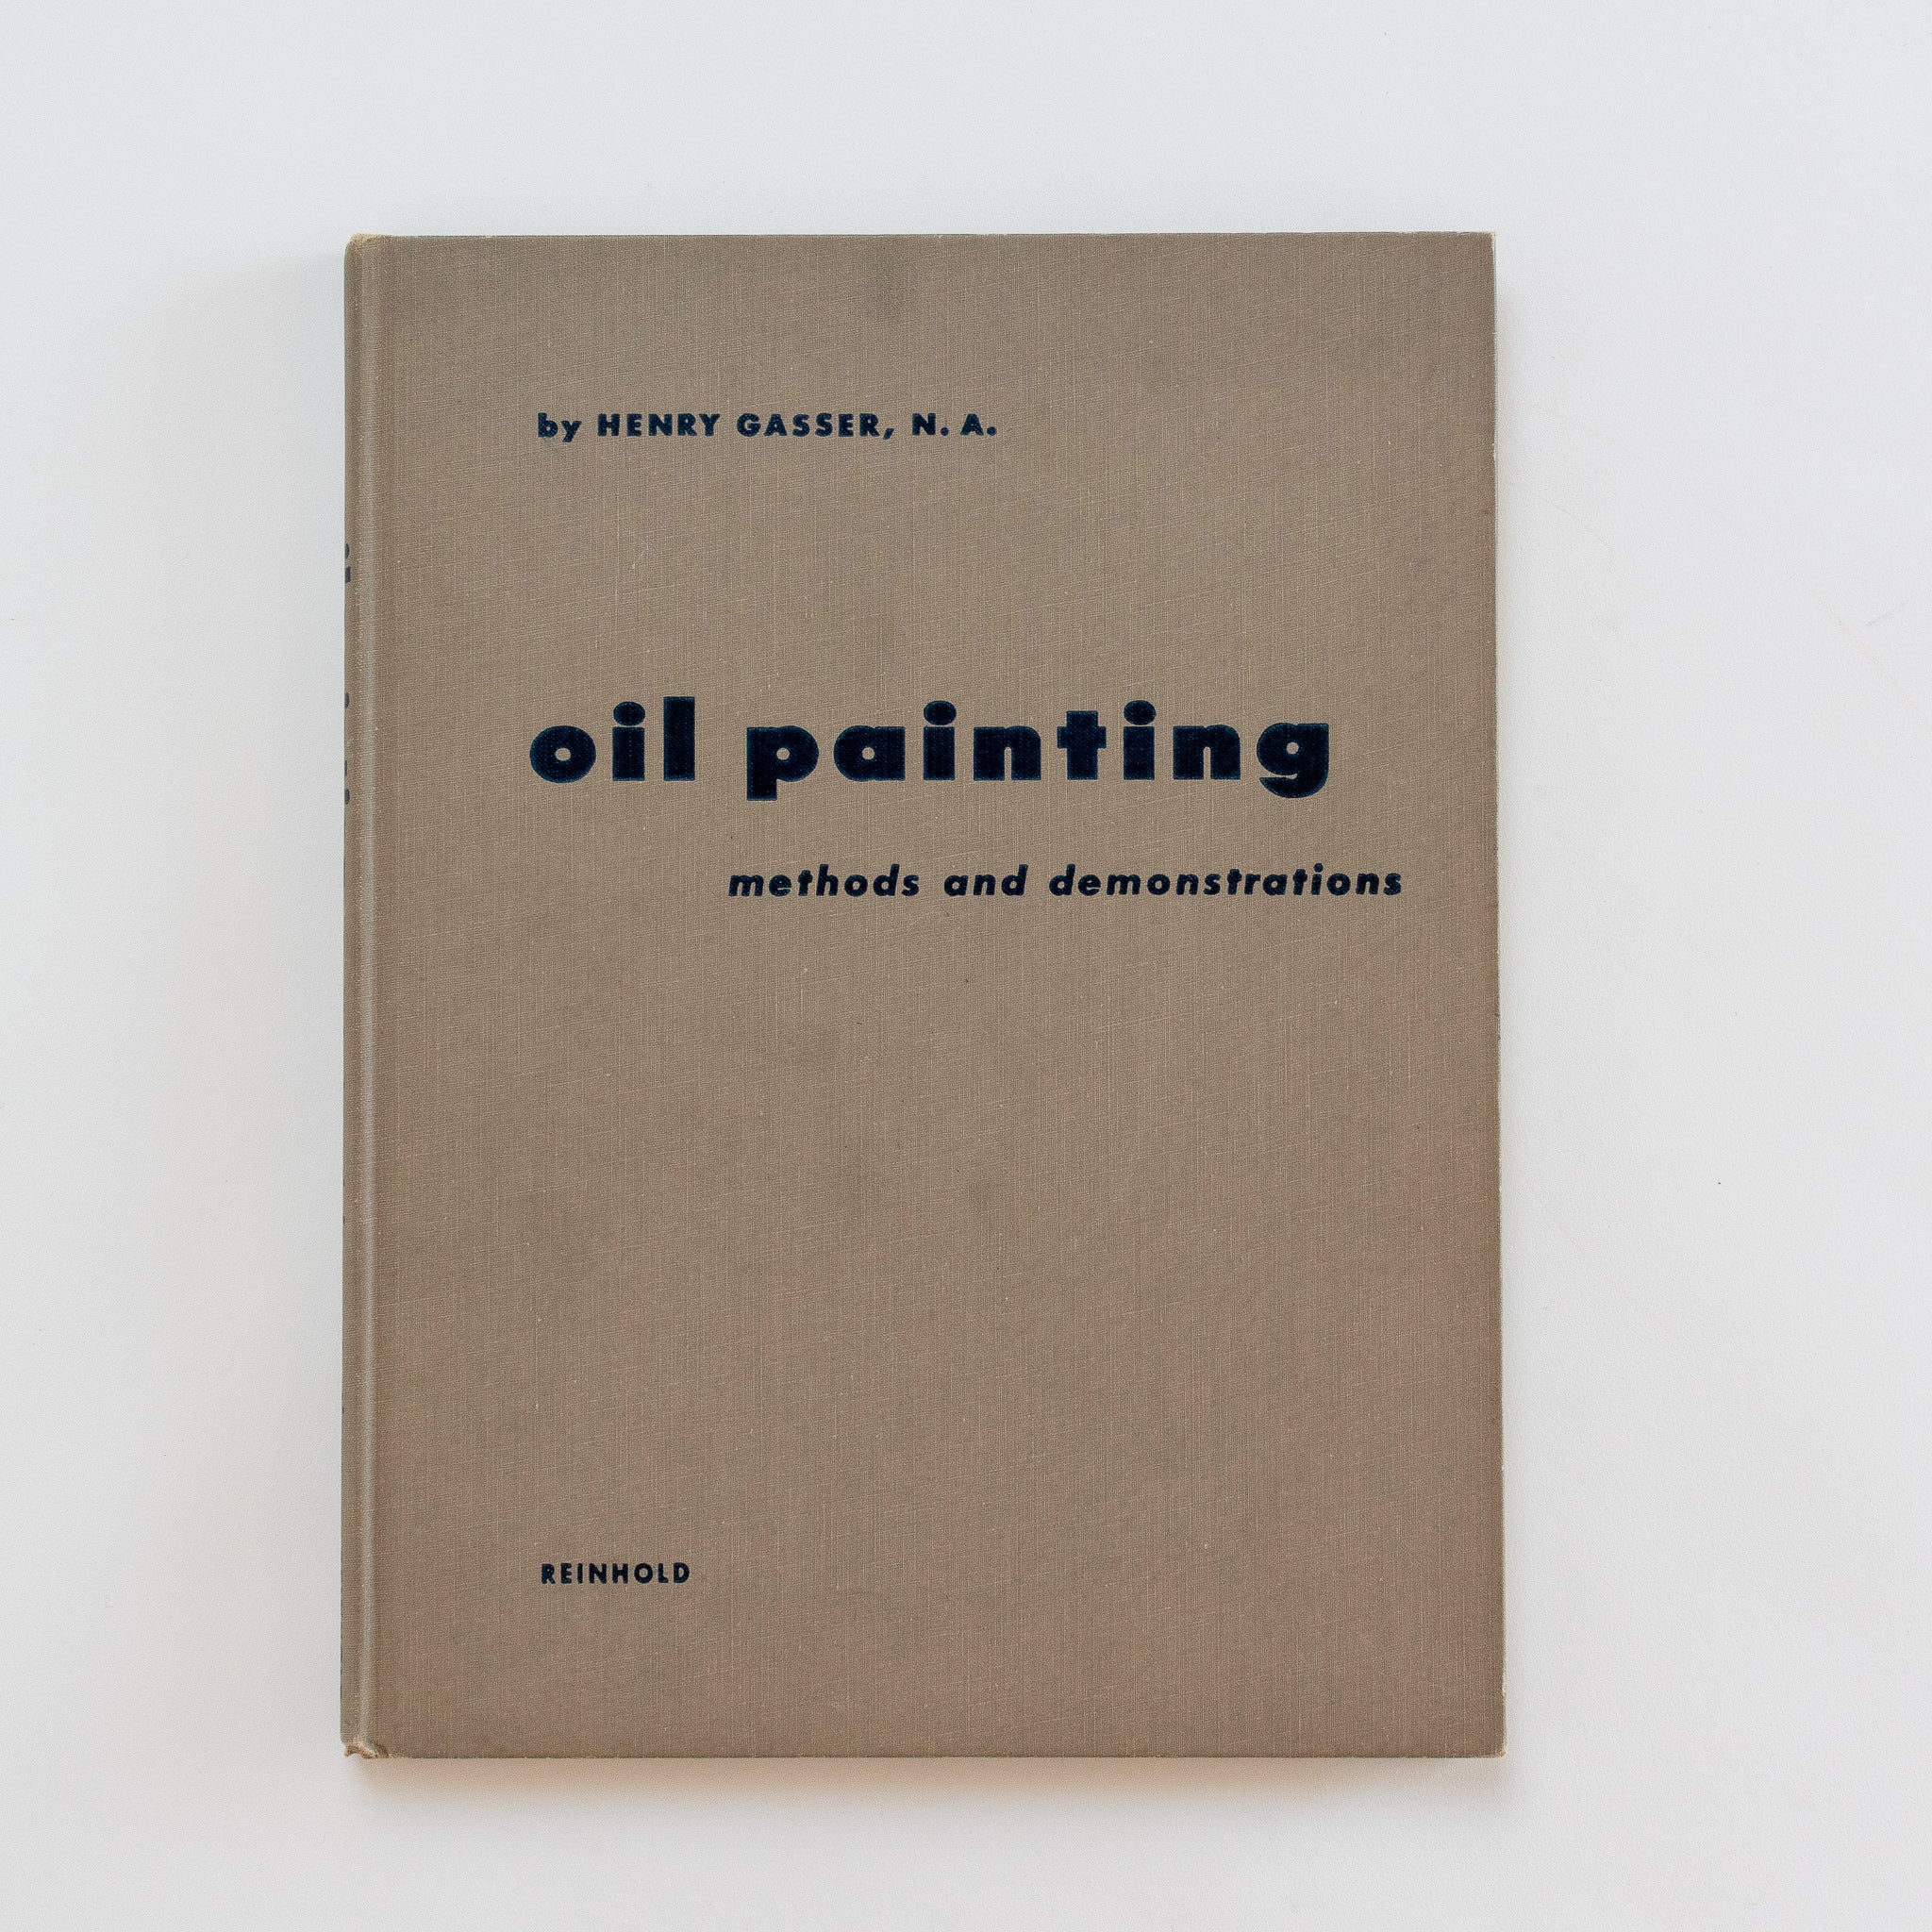 "Oil Painting Methods and Demonstration" by Henry Gasser, N.A. - Homekeep Market